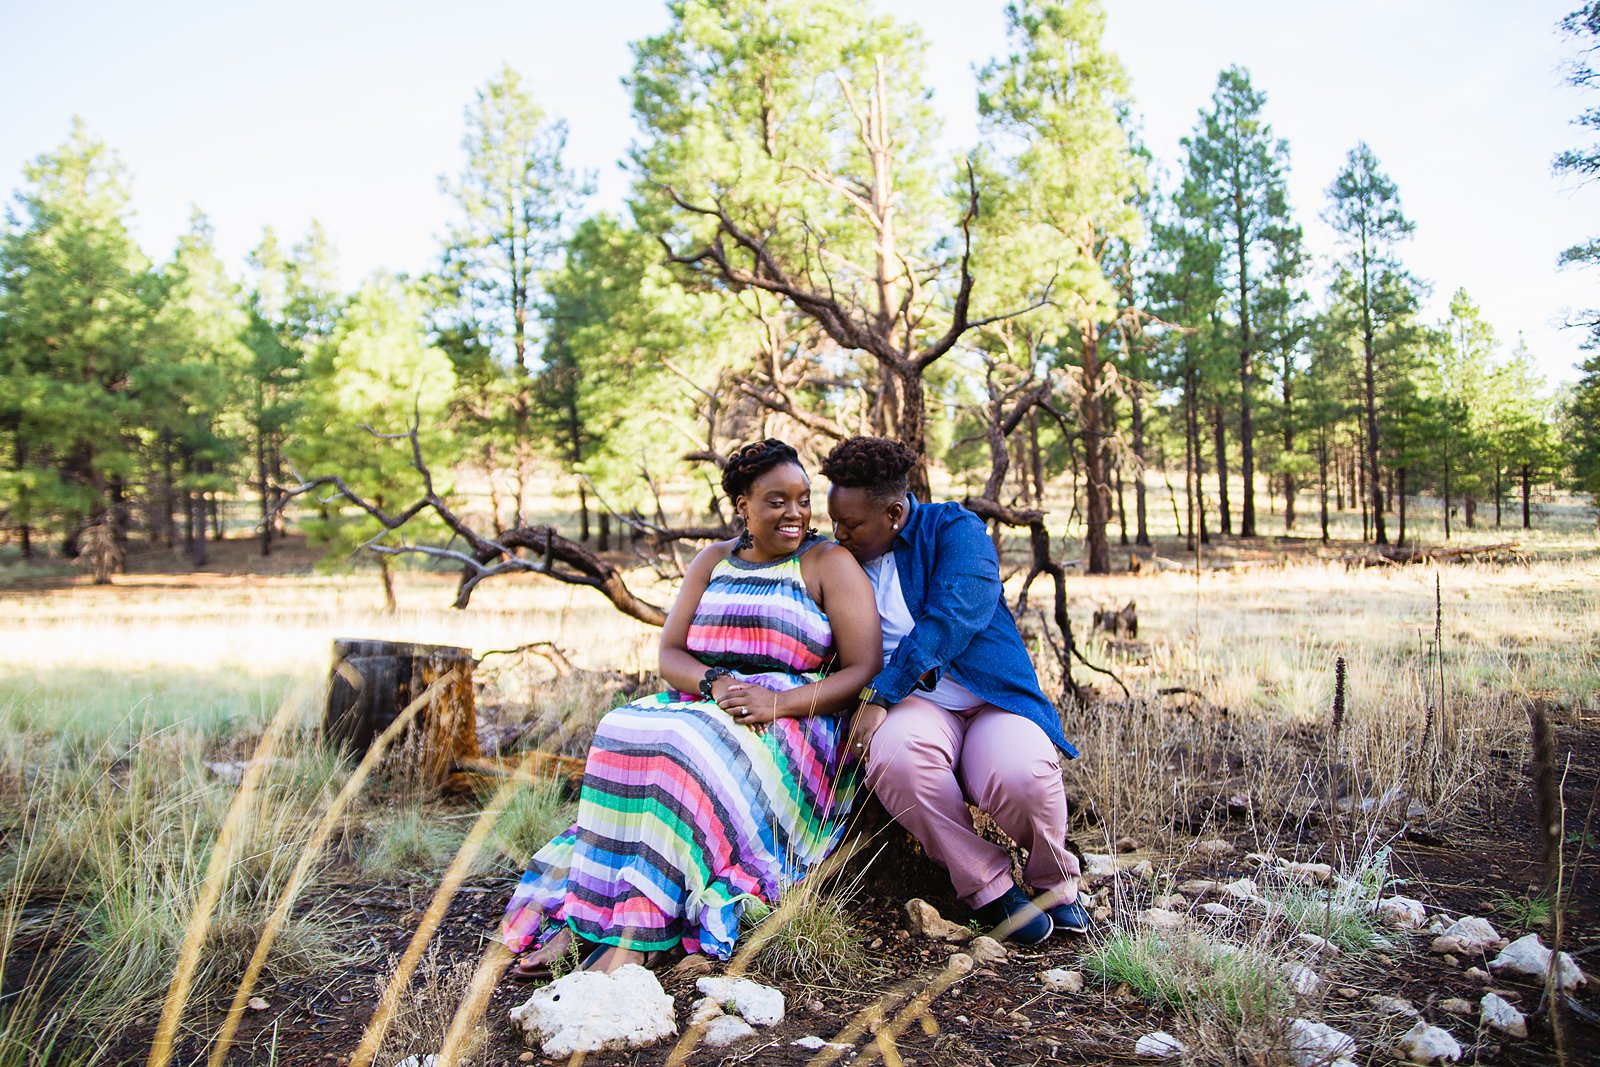 Same sex couple pose together during their Flagstaff engagement session in the woods by Flagstaff wedding photographer PMA Photography.